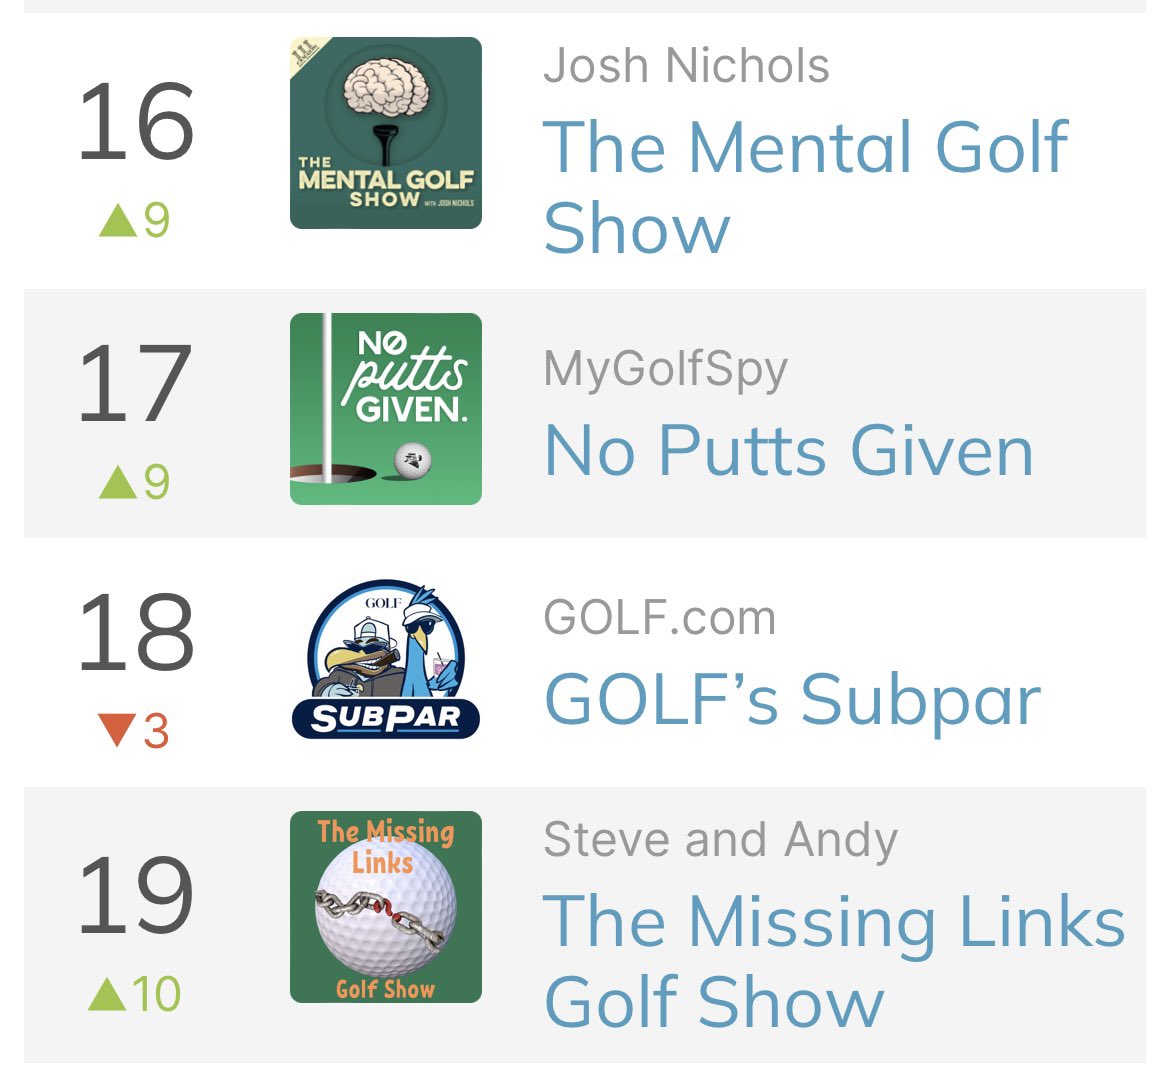 Great to see the two podcasts climbing the rankings! Thanks for collaborating @joshlukenichols @mentalgolfshow